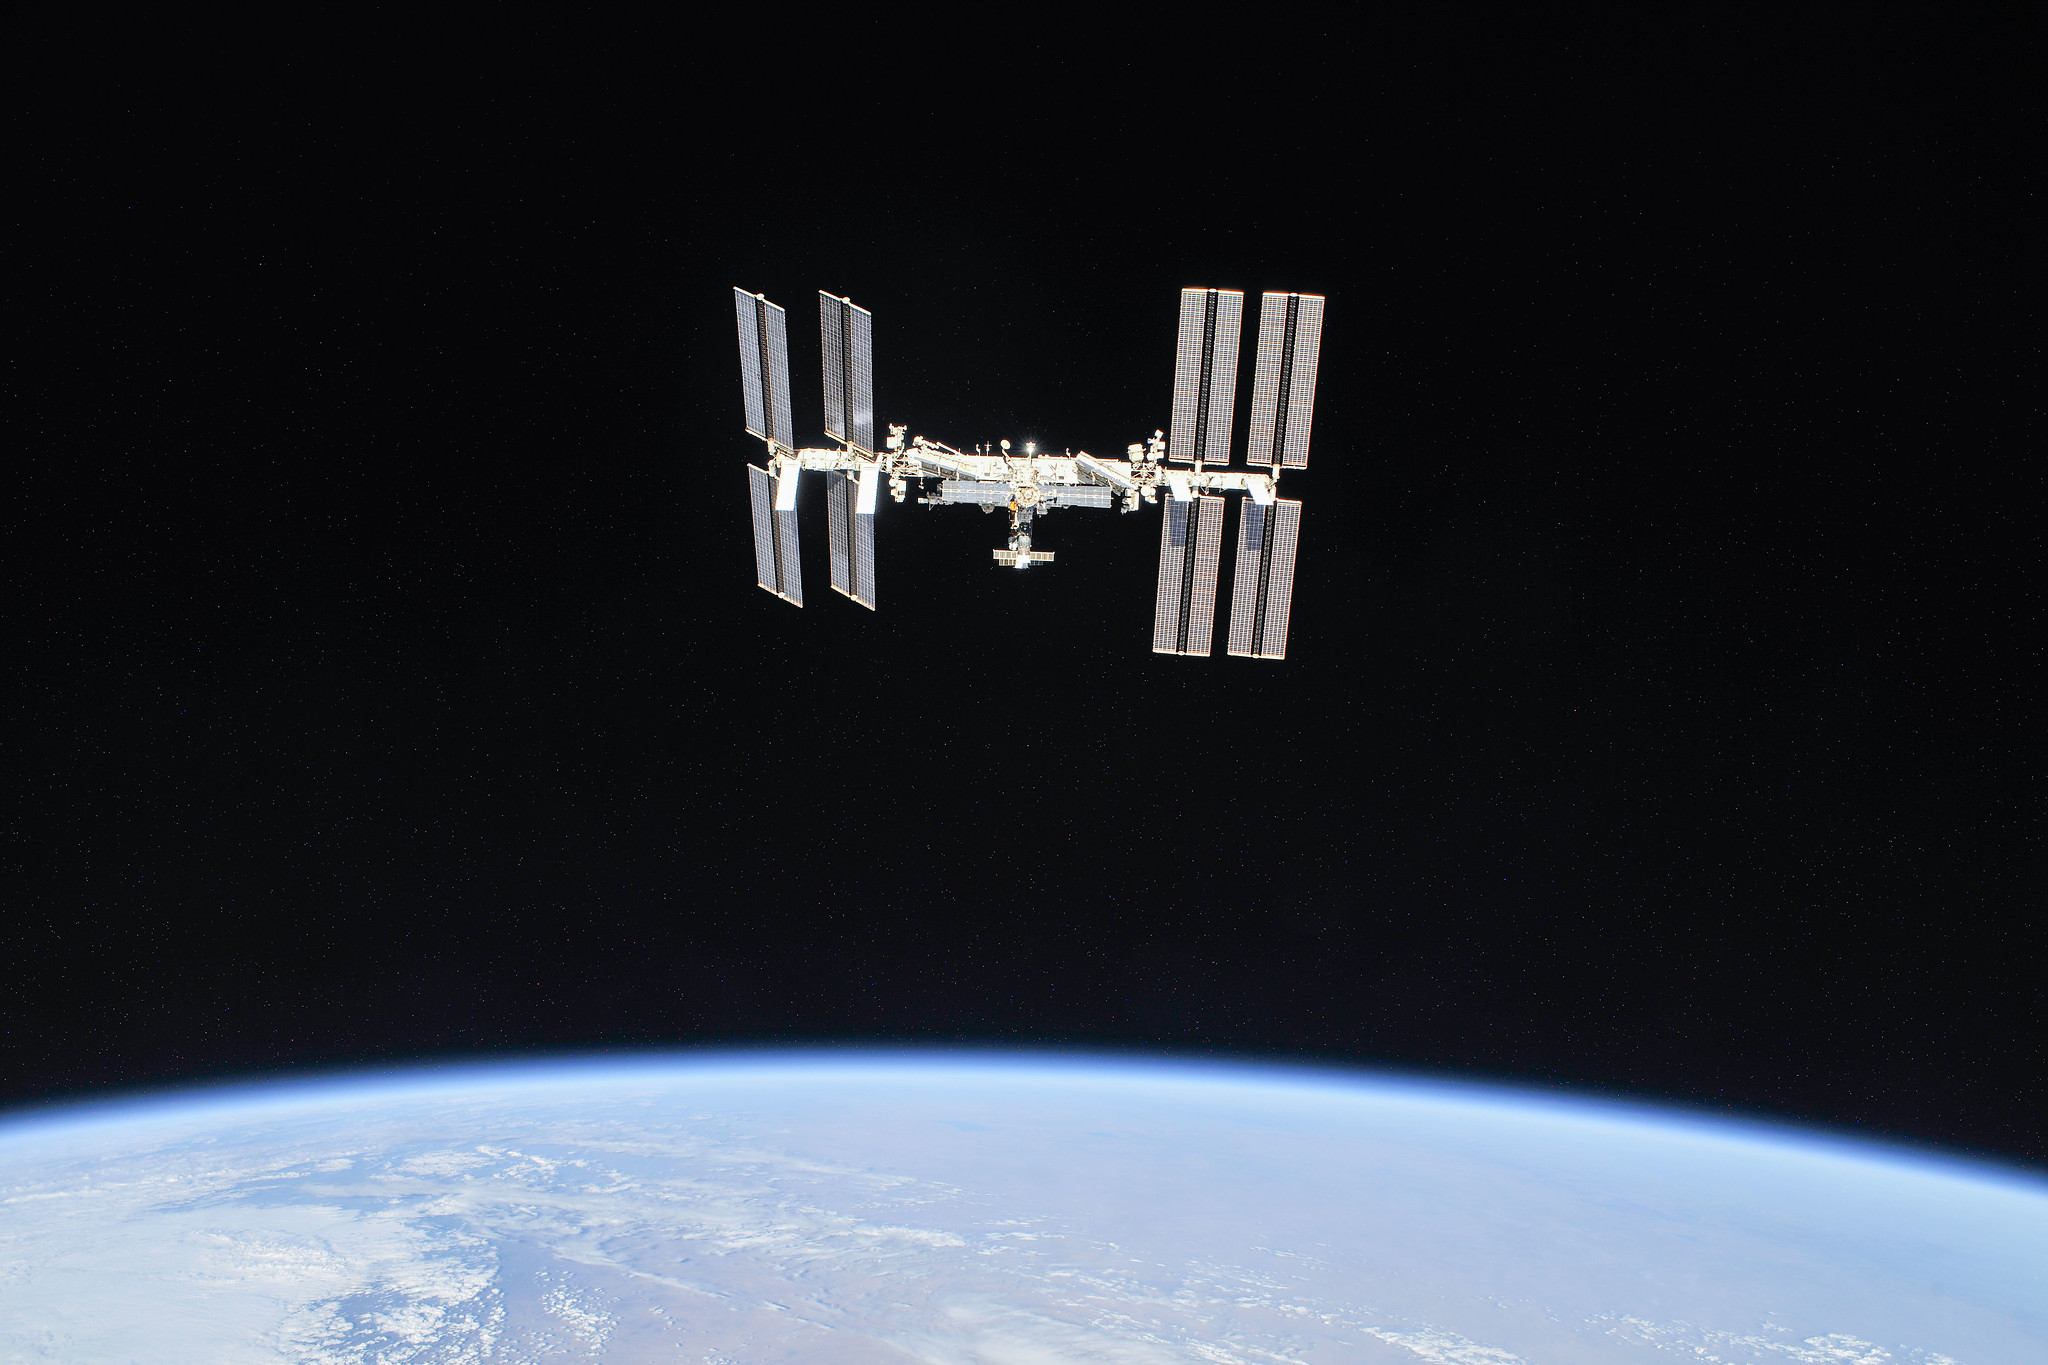 The International Space Station photographed by Expedition 56 crew members from a Soyuz spacecraft after undocking on Oct. 4, 2018. 